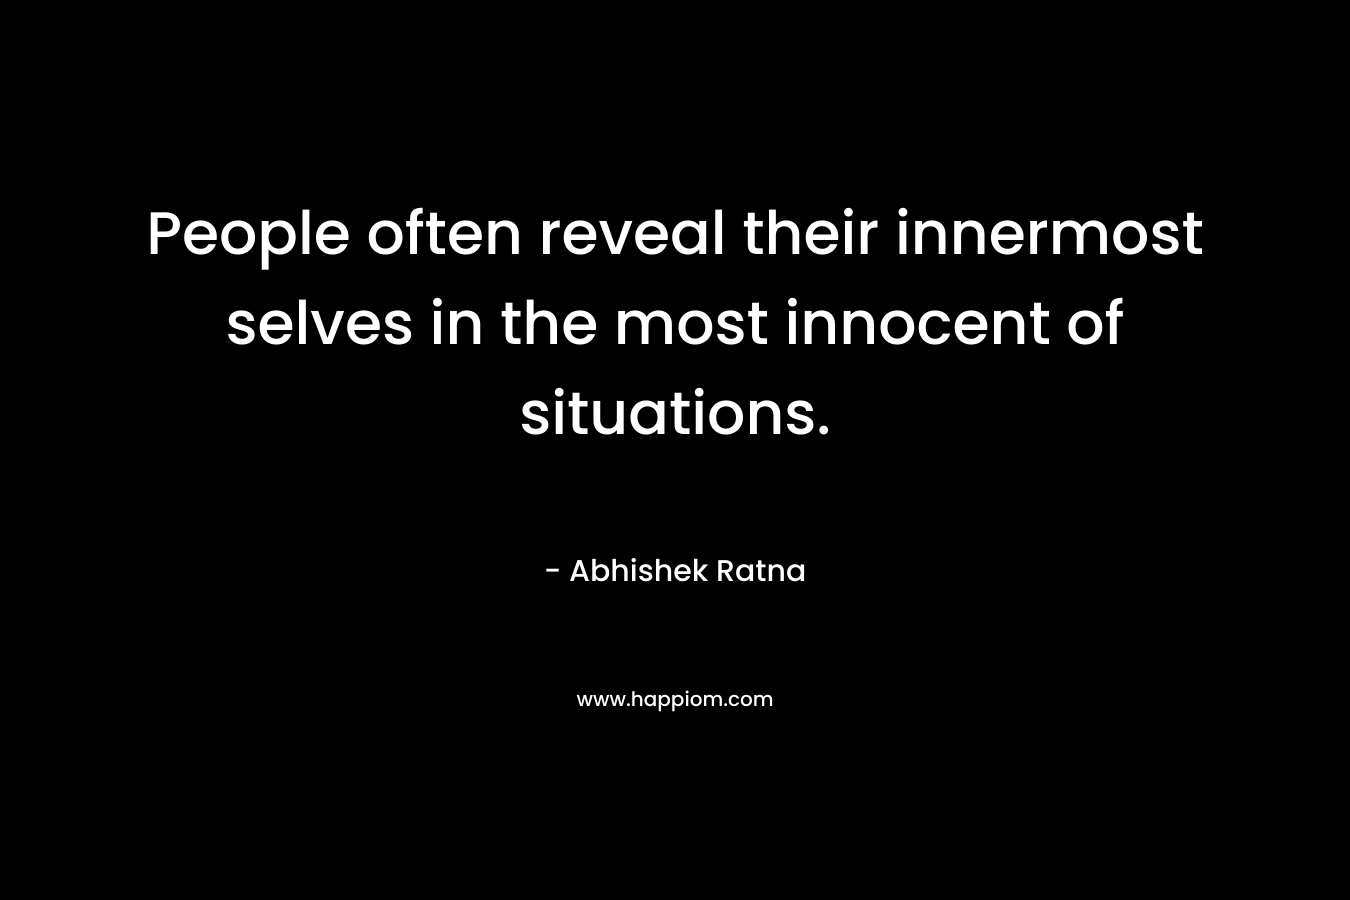 People often reveal their innermost selves in the most innocent of situations.